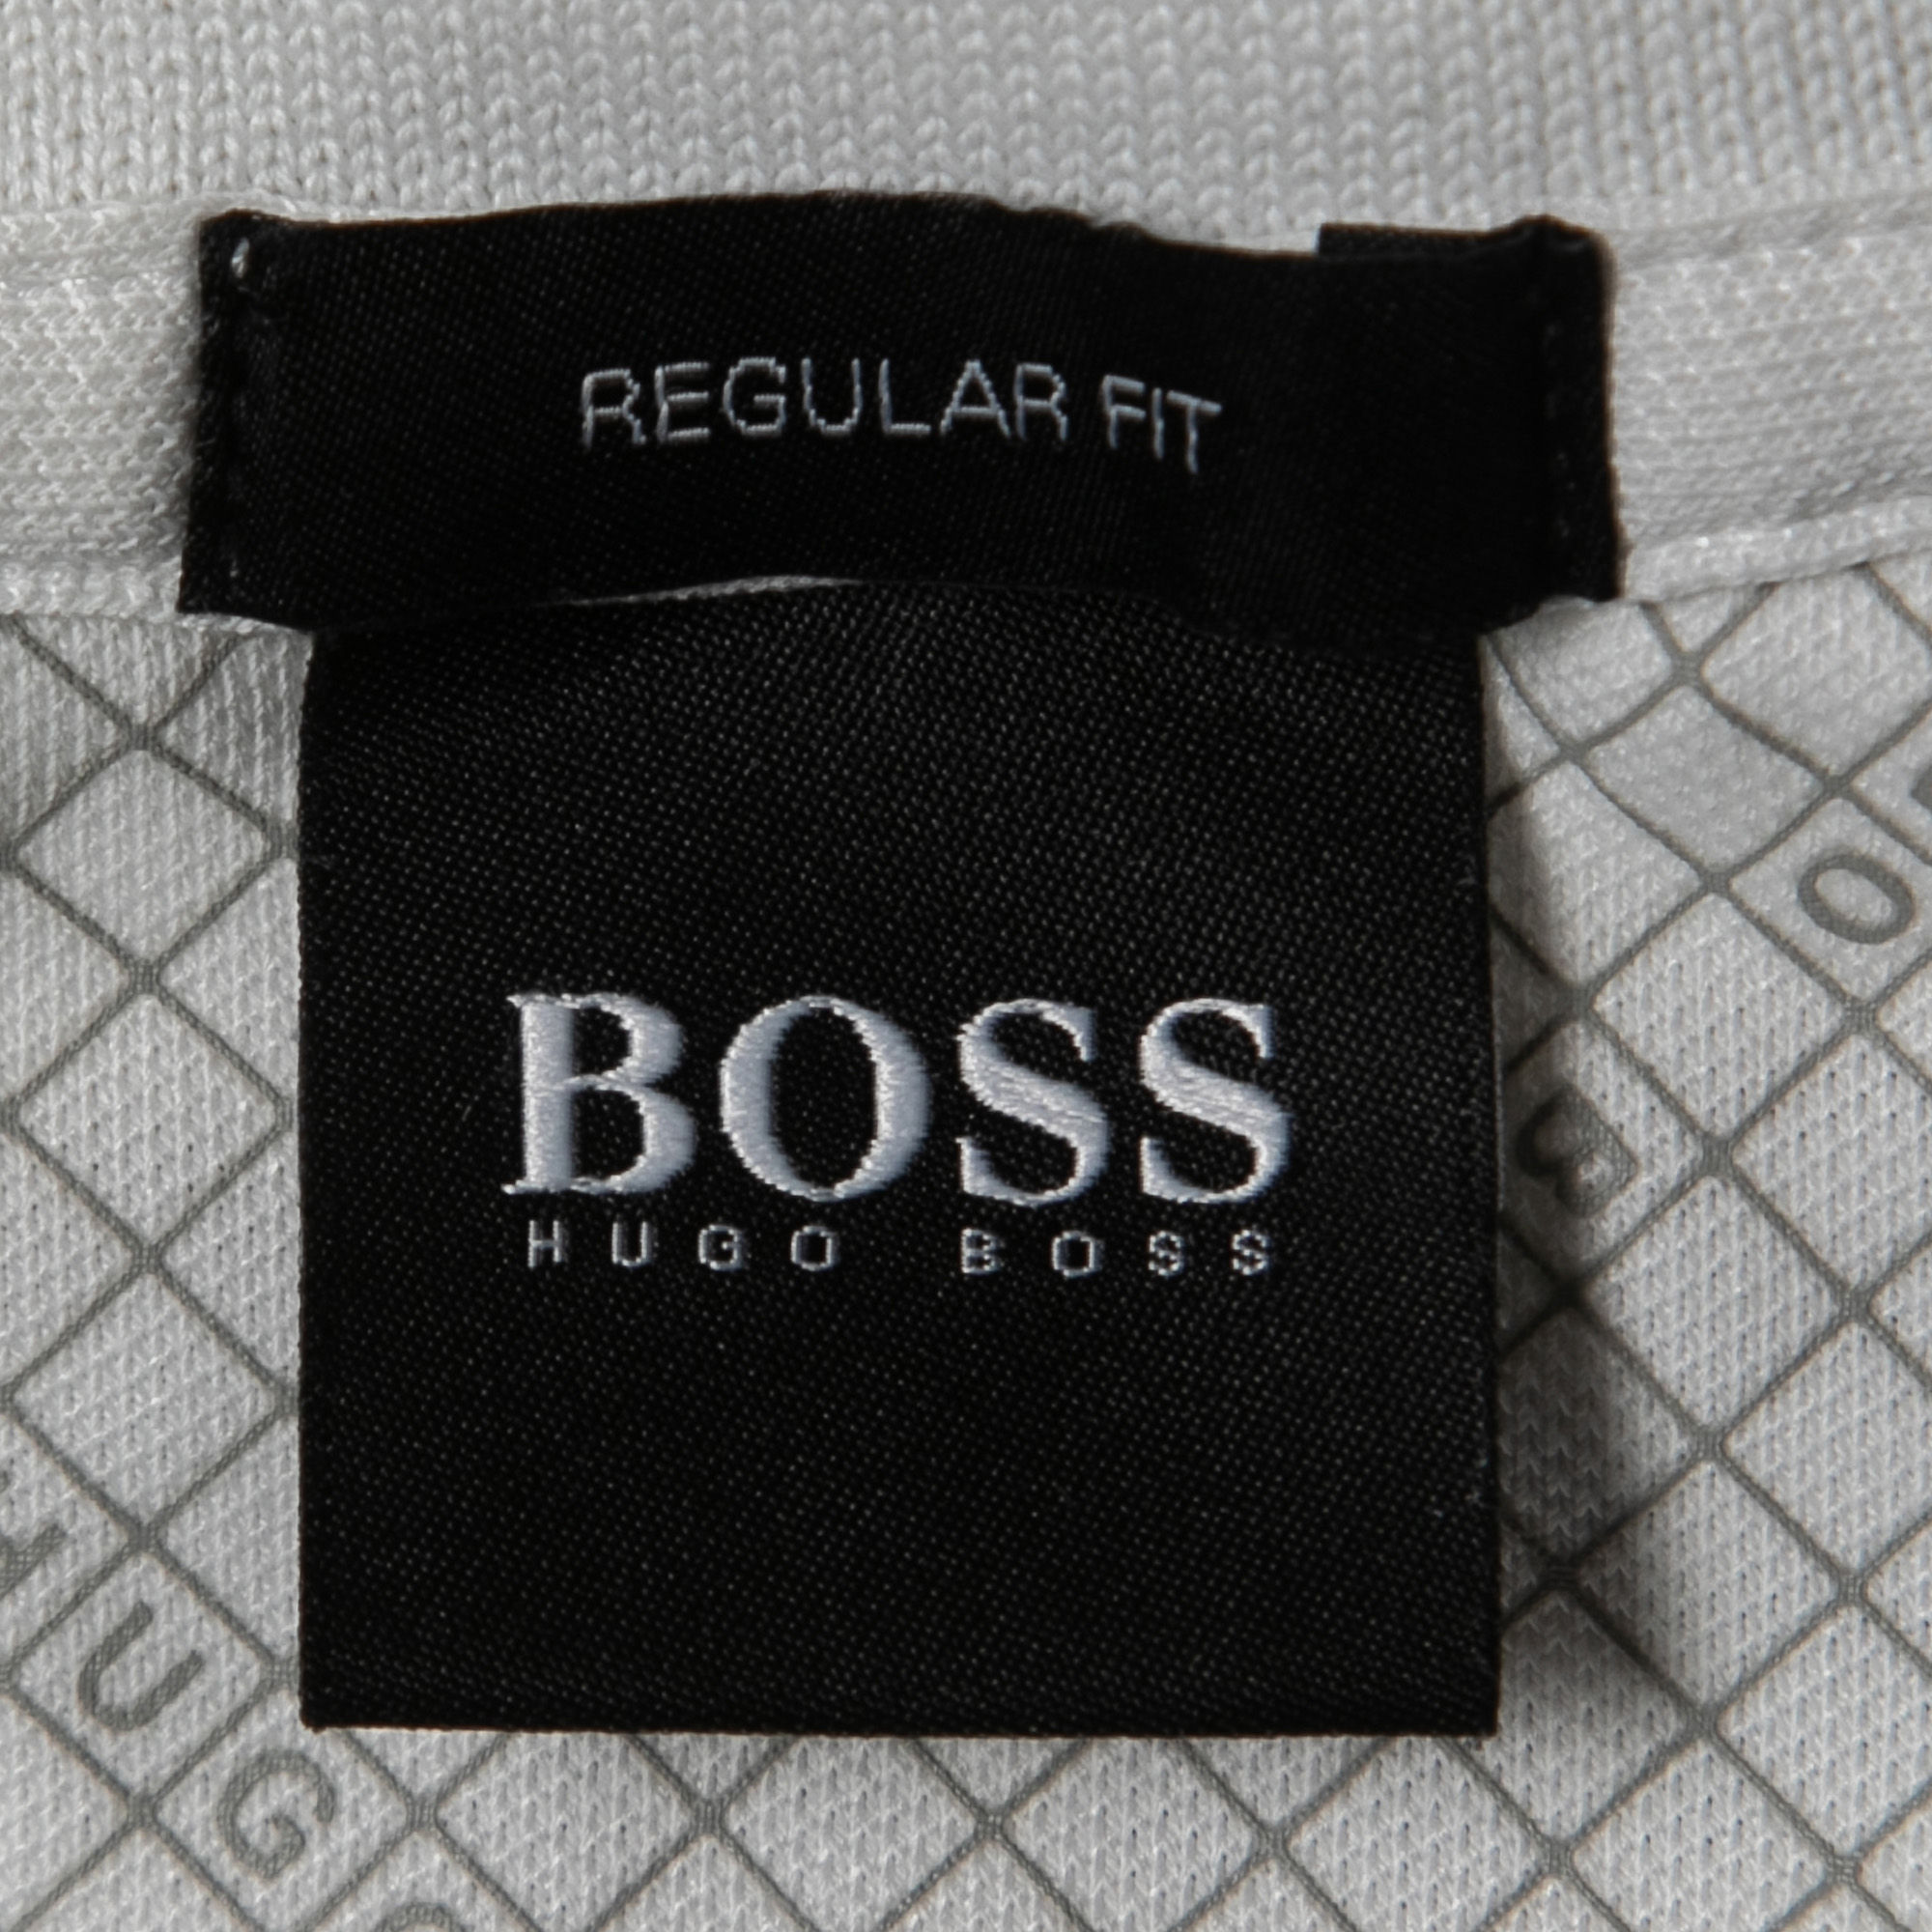 Boss By Hugo Boss White Logo Embroidered Knit Regular Fit Polo T-Shirt XXL